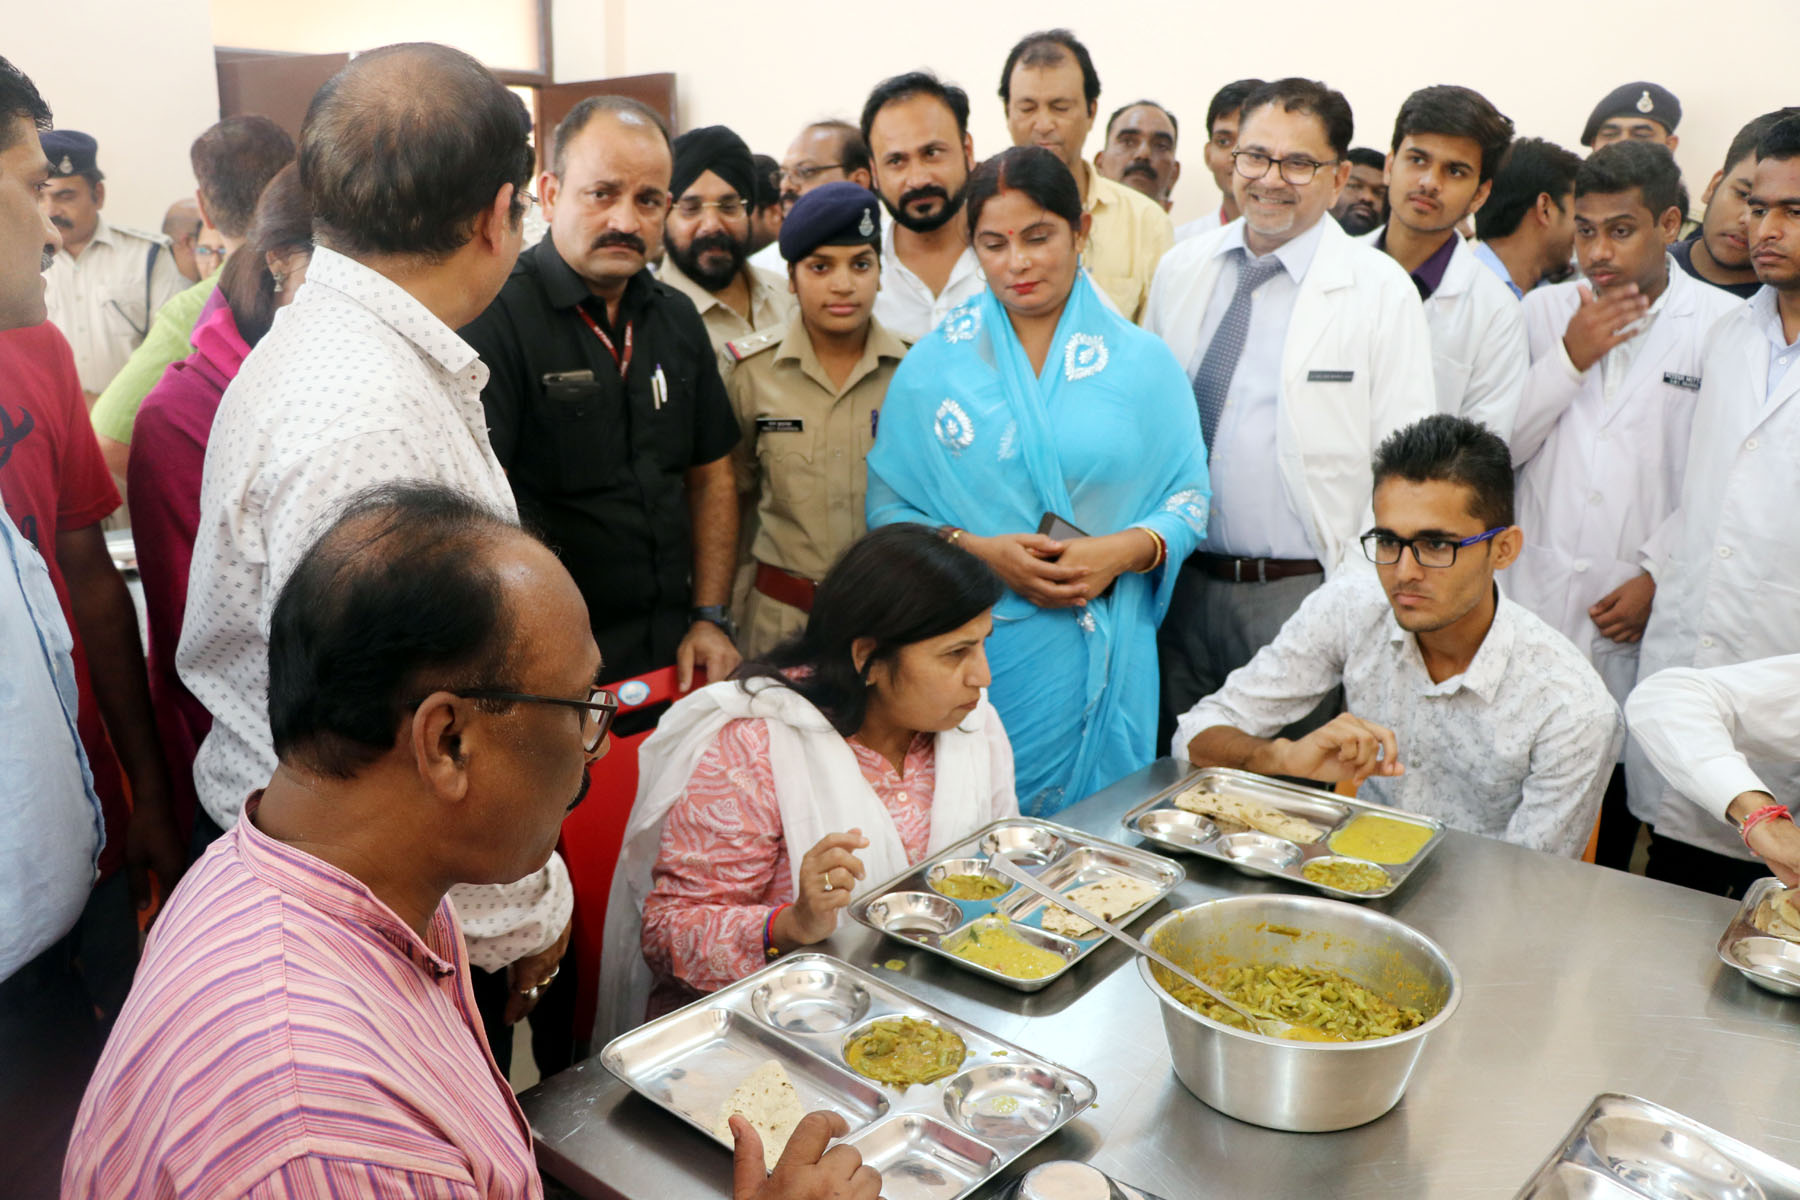 Worm found in the food of medical college students